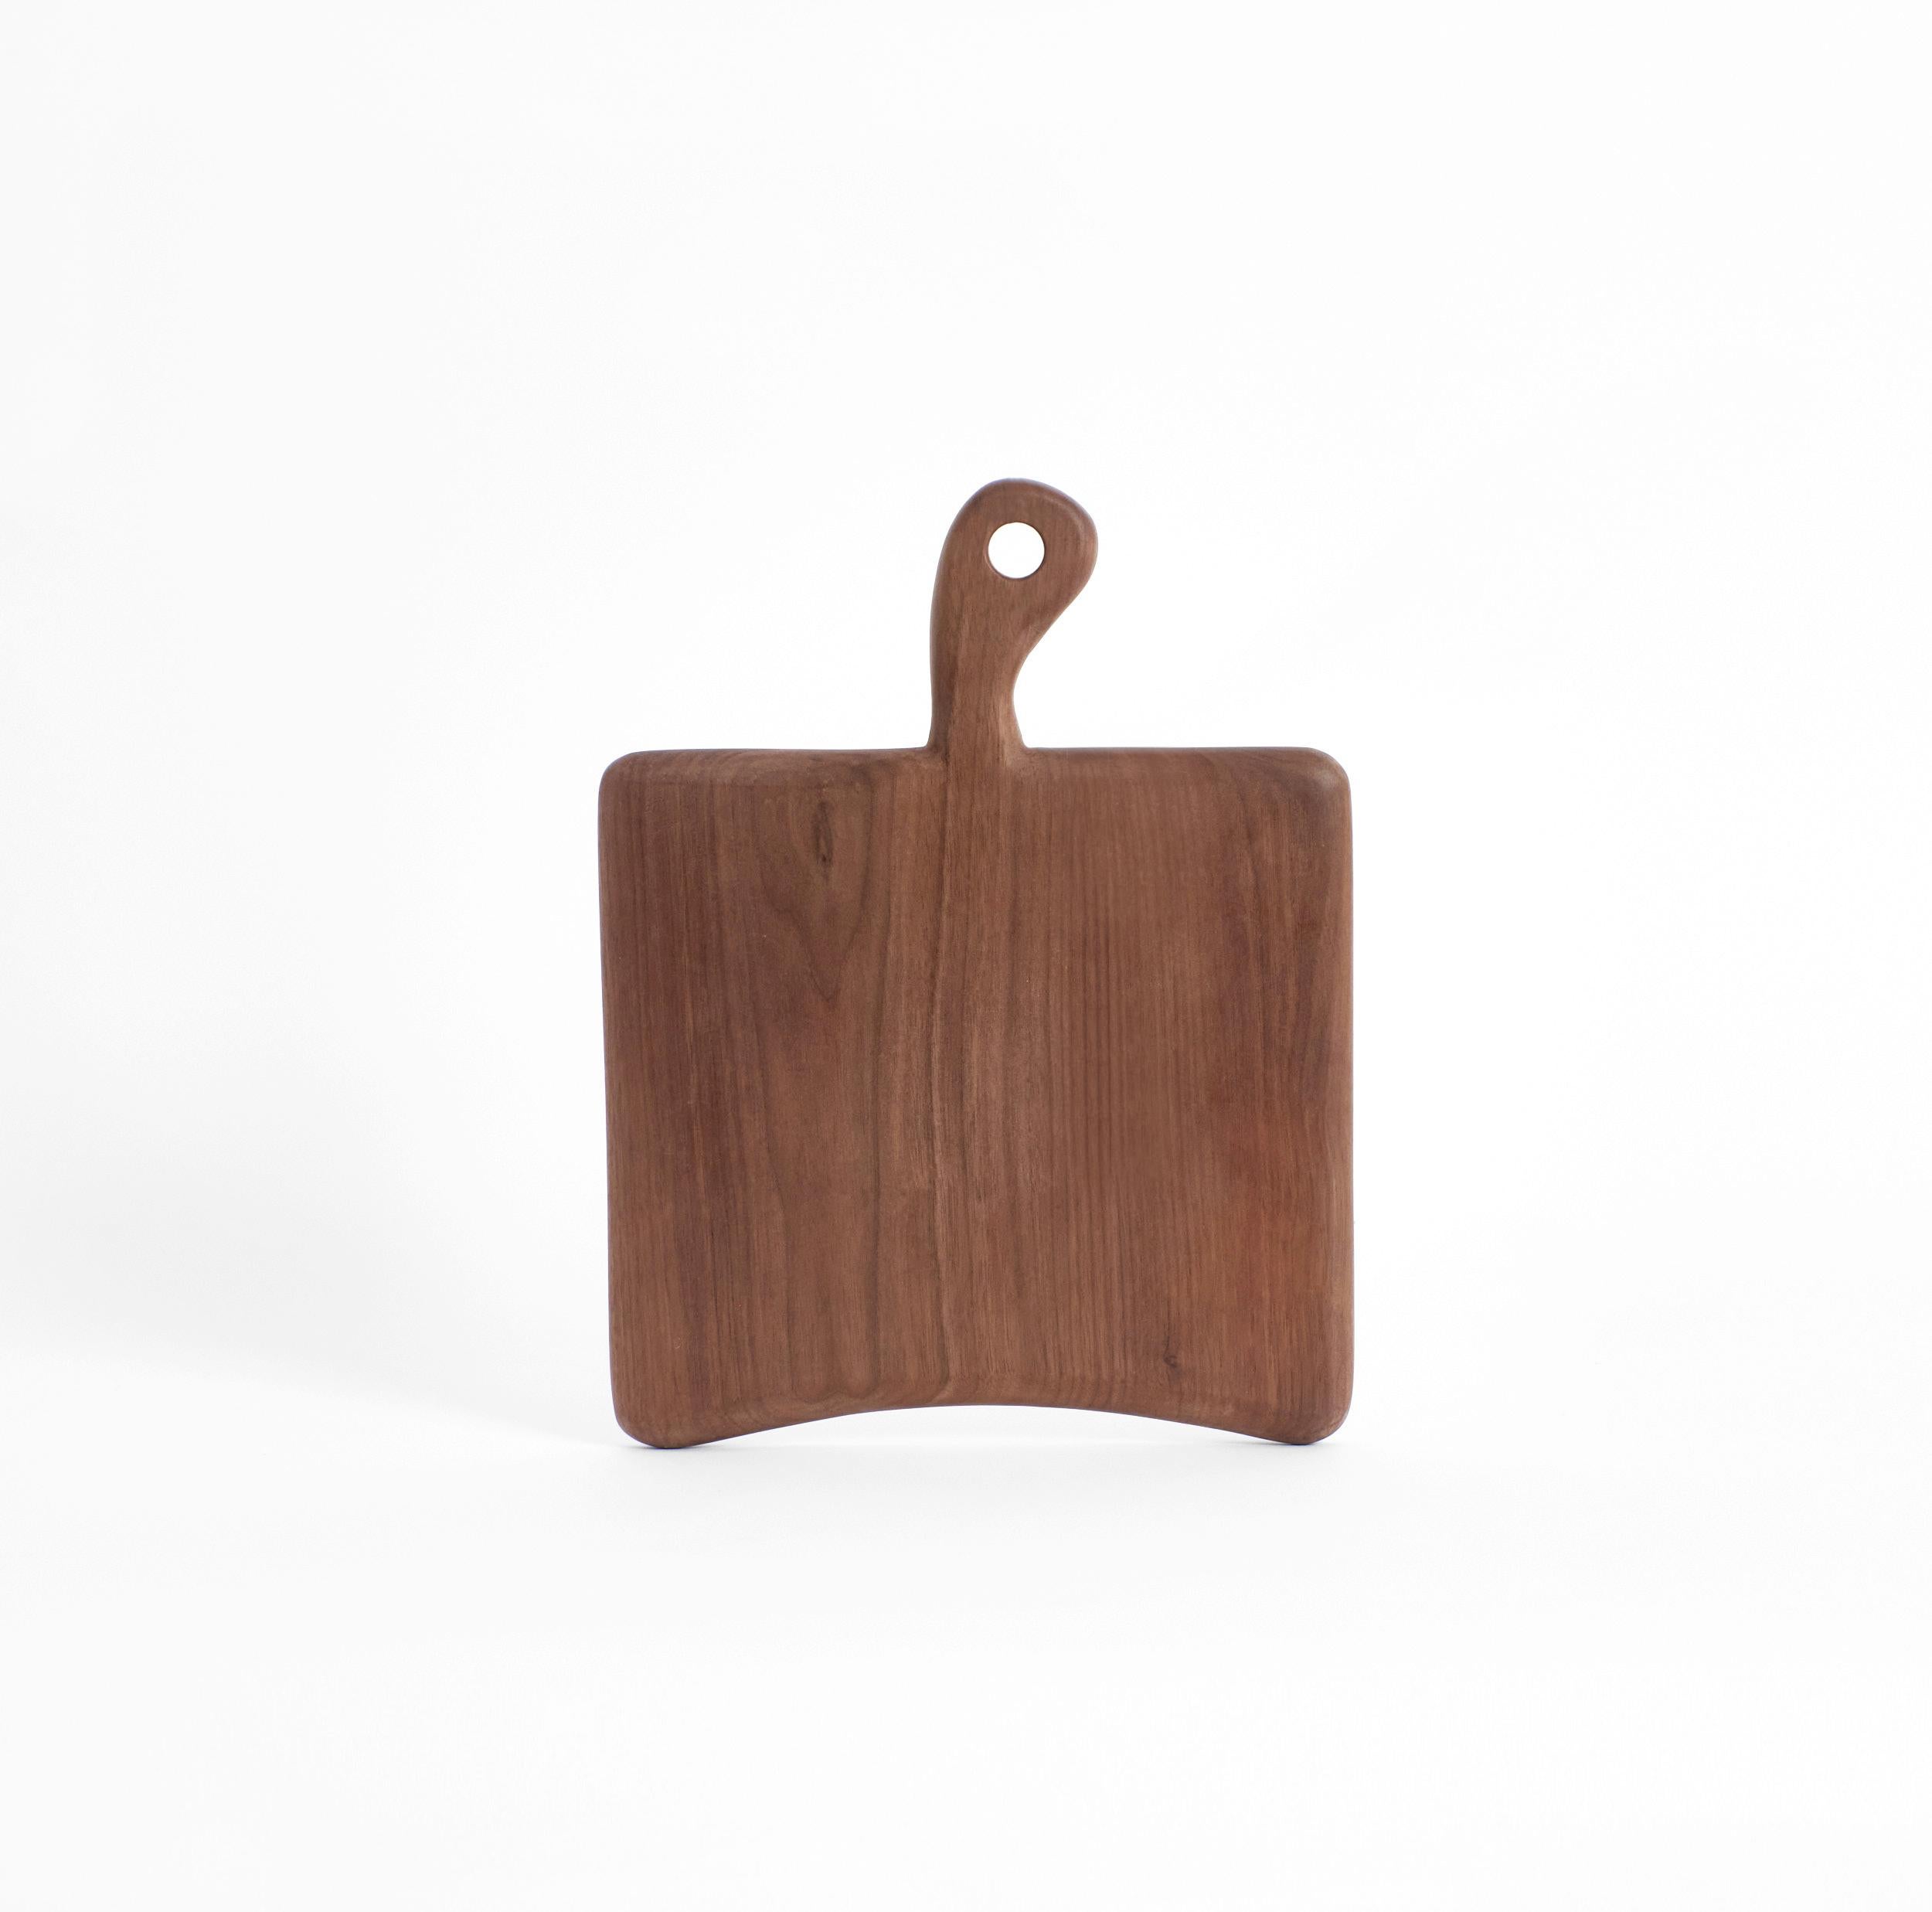 Set of 2 board 31 in walnut by Project 213A
Dimensions: D 31.5 x W 24.5 x H 2 cm.
Materials: Walnut wood. 

This small square-shaped board is hand-carved from walnut. The boards as an individual or as part of the family will become a key item in